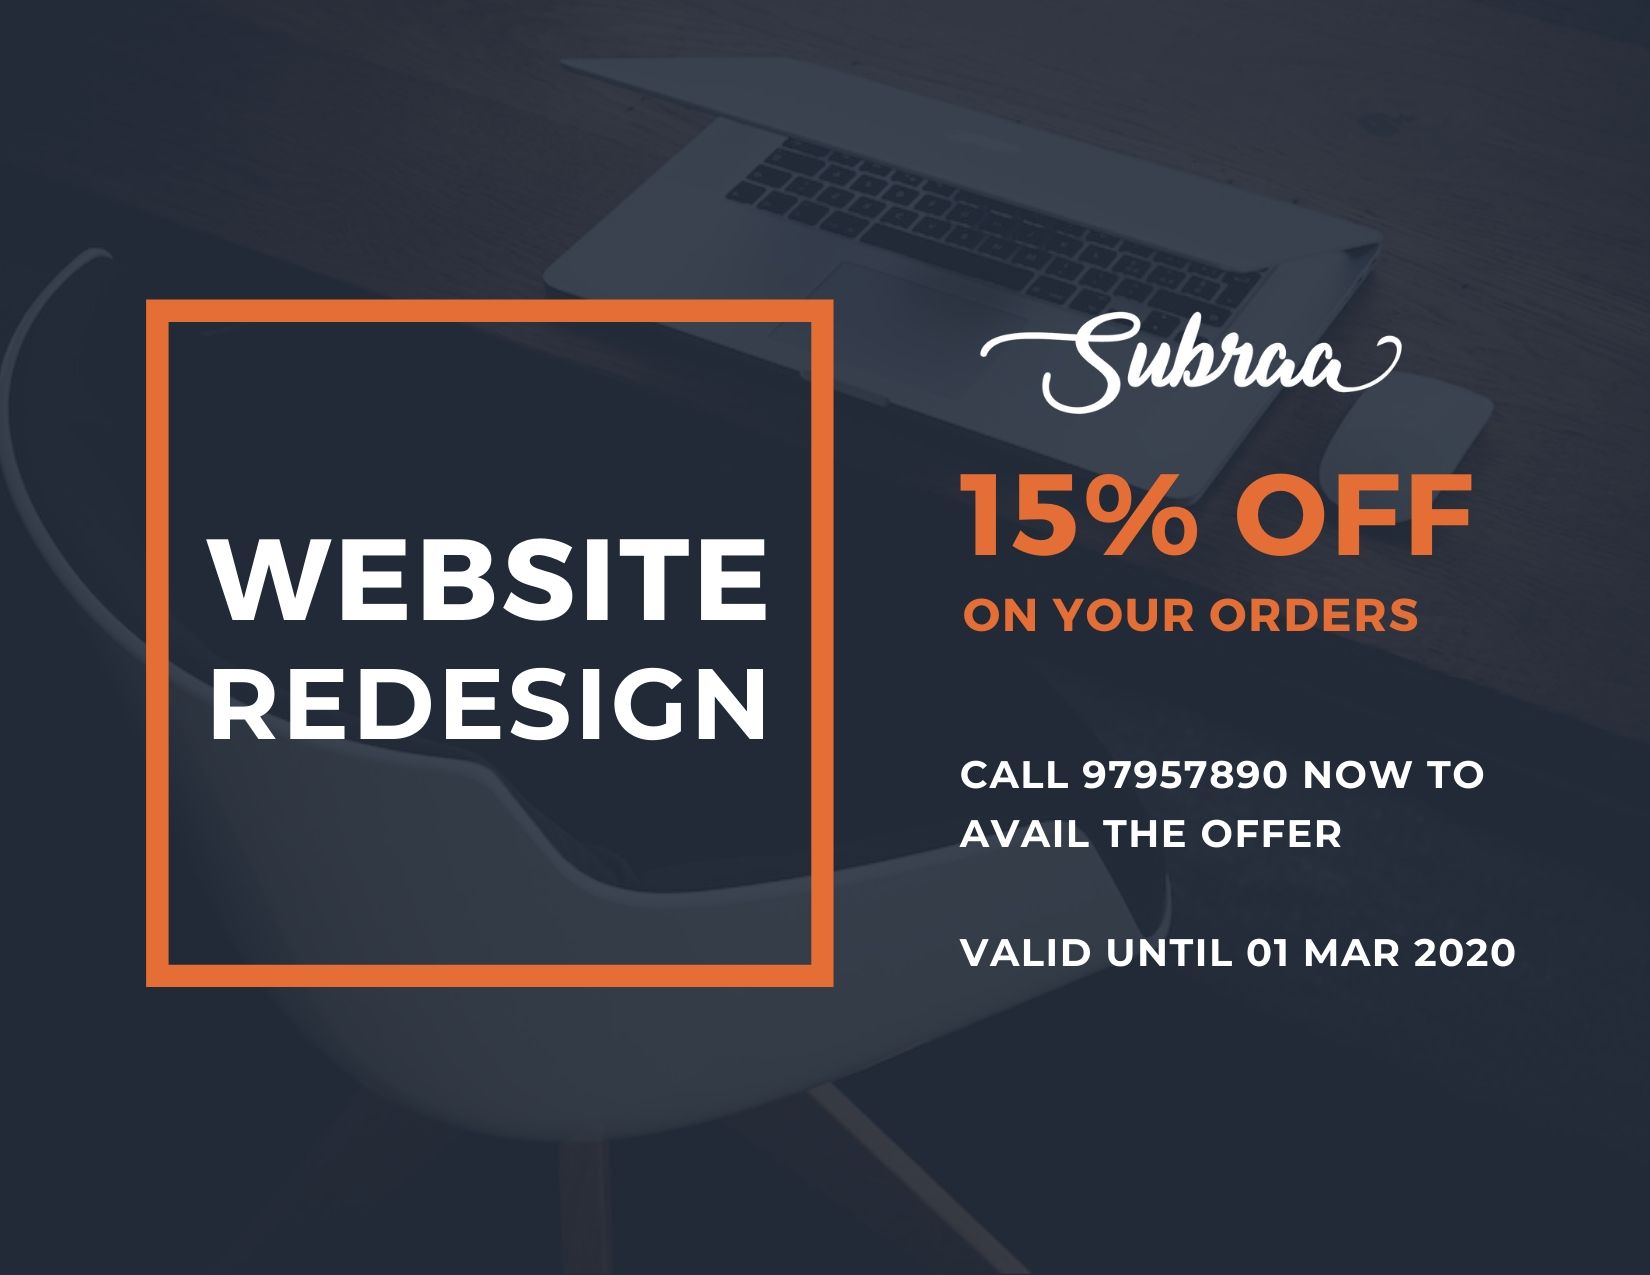 Website Redesign Offers and Promotions by Subraa, Freelance Web Designer Singapore